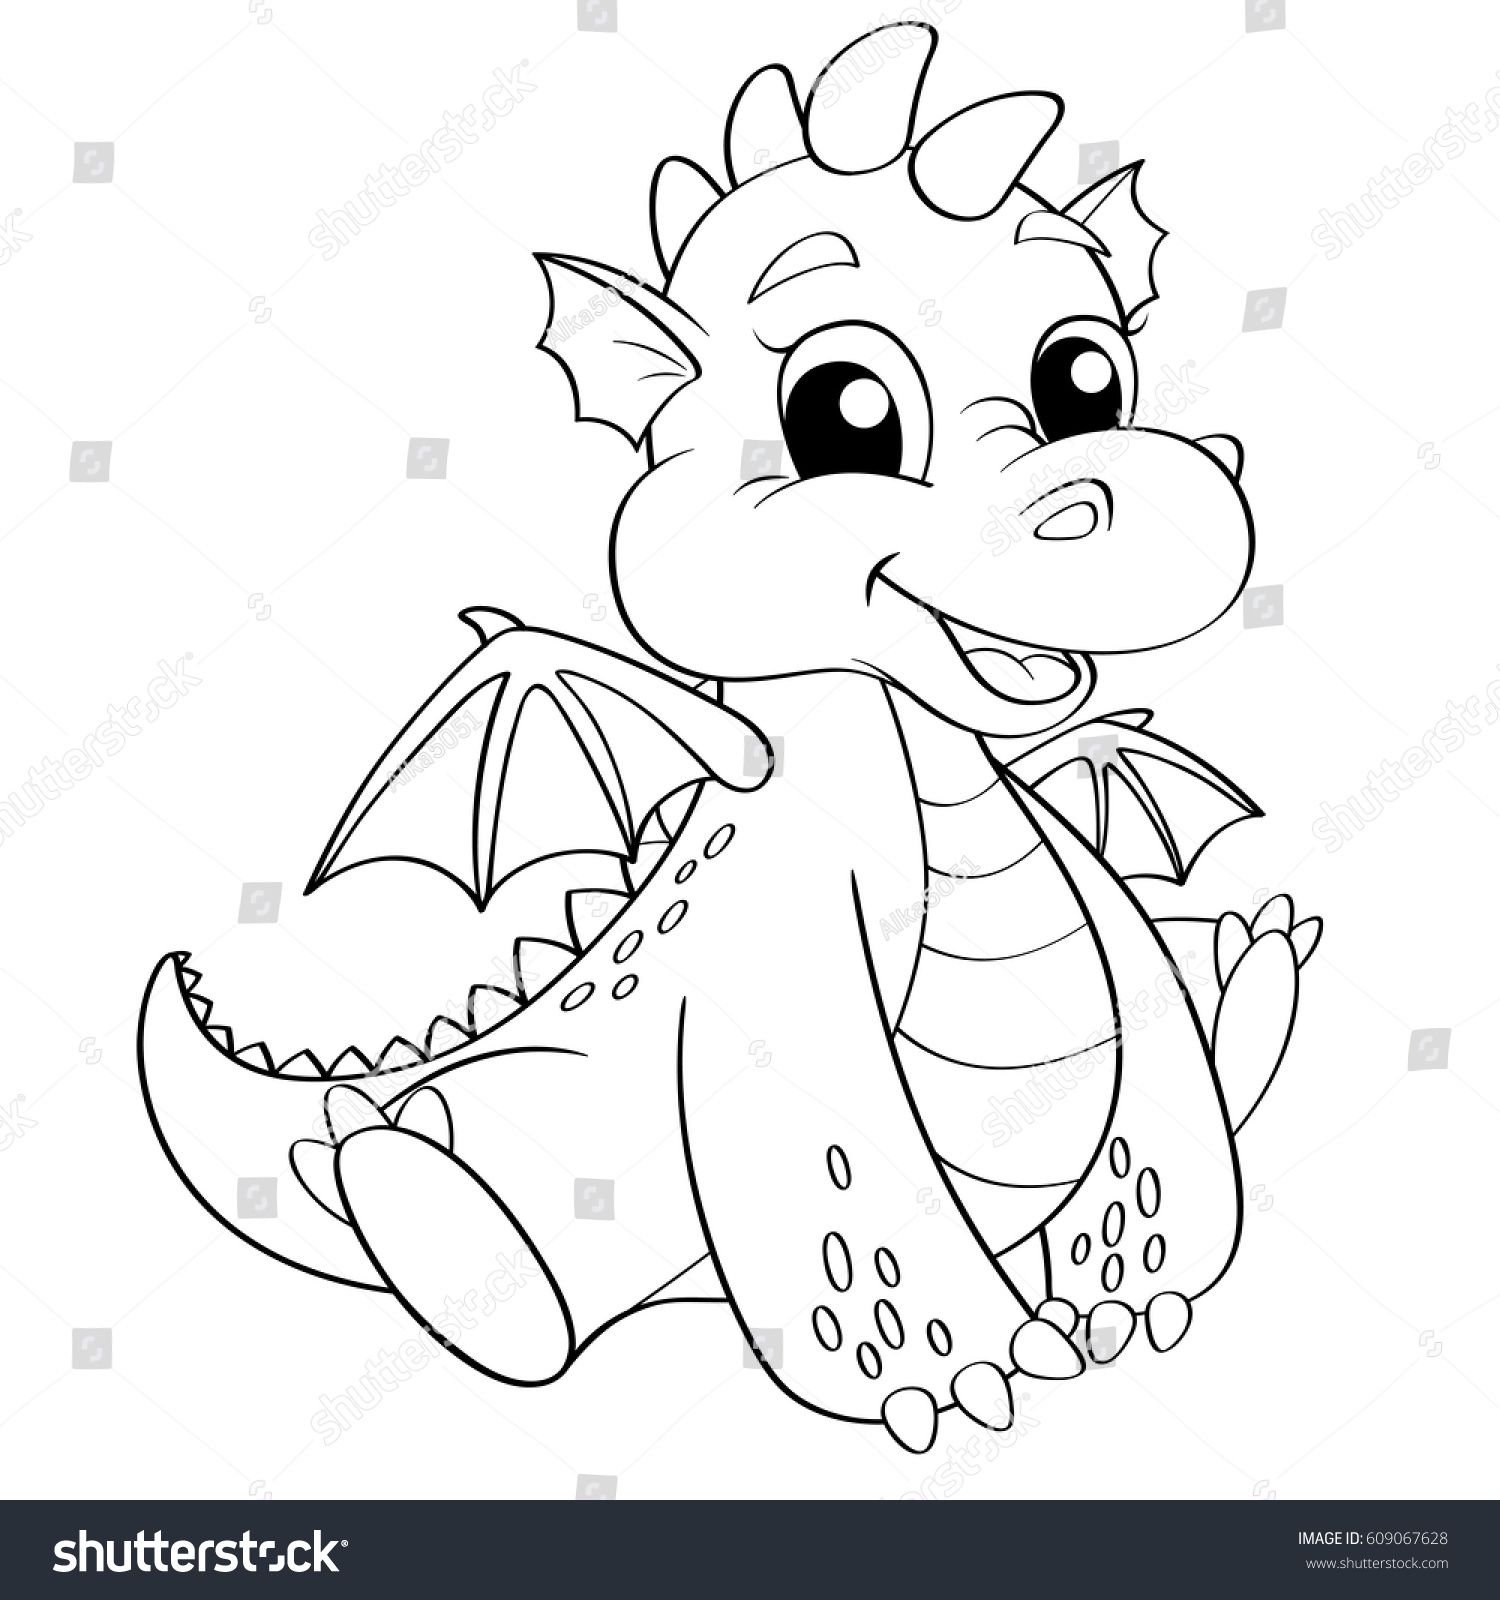 dragons clipart black and white cartoon